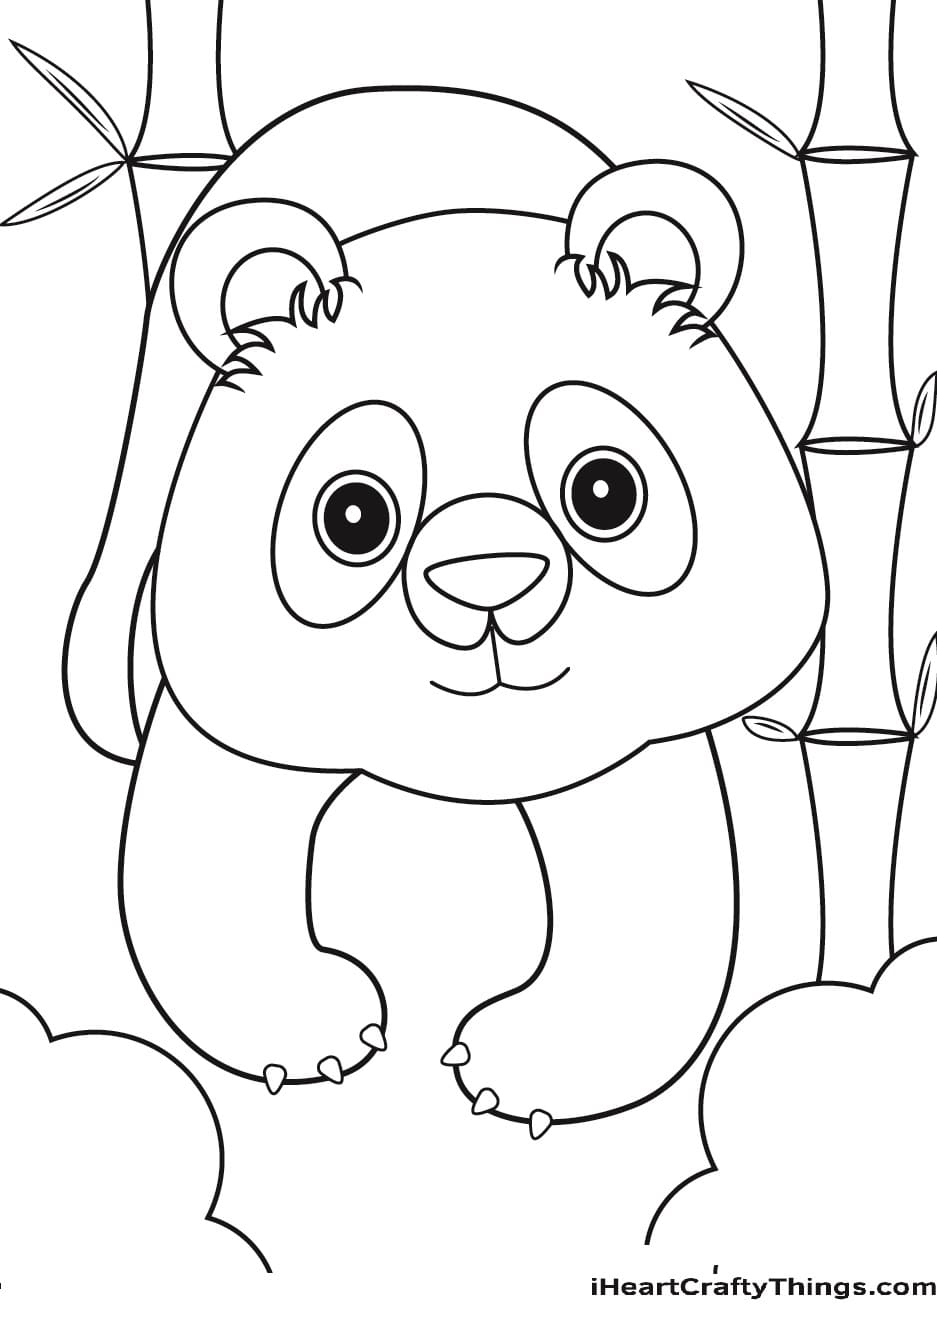 Giant Panda Sweet For Kids Coloring Page